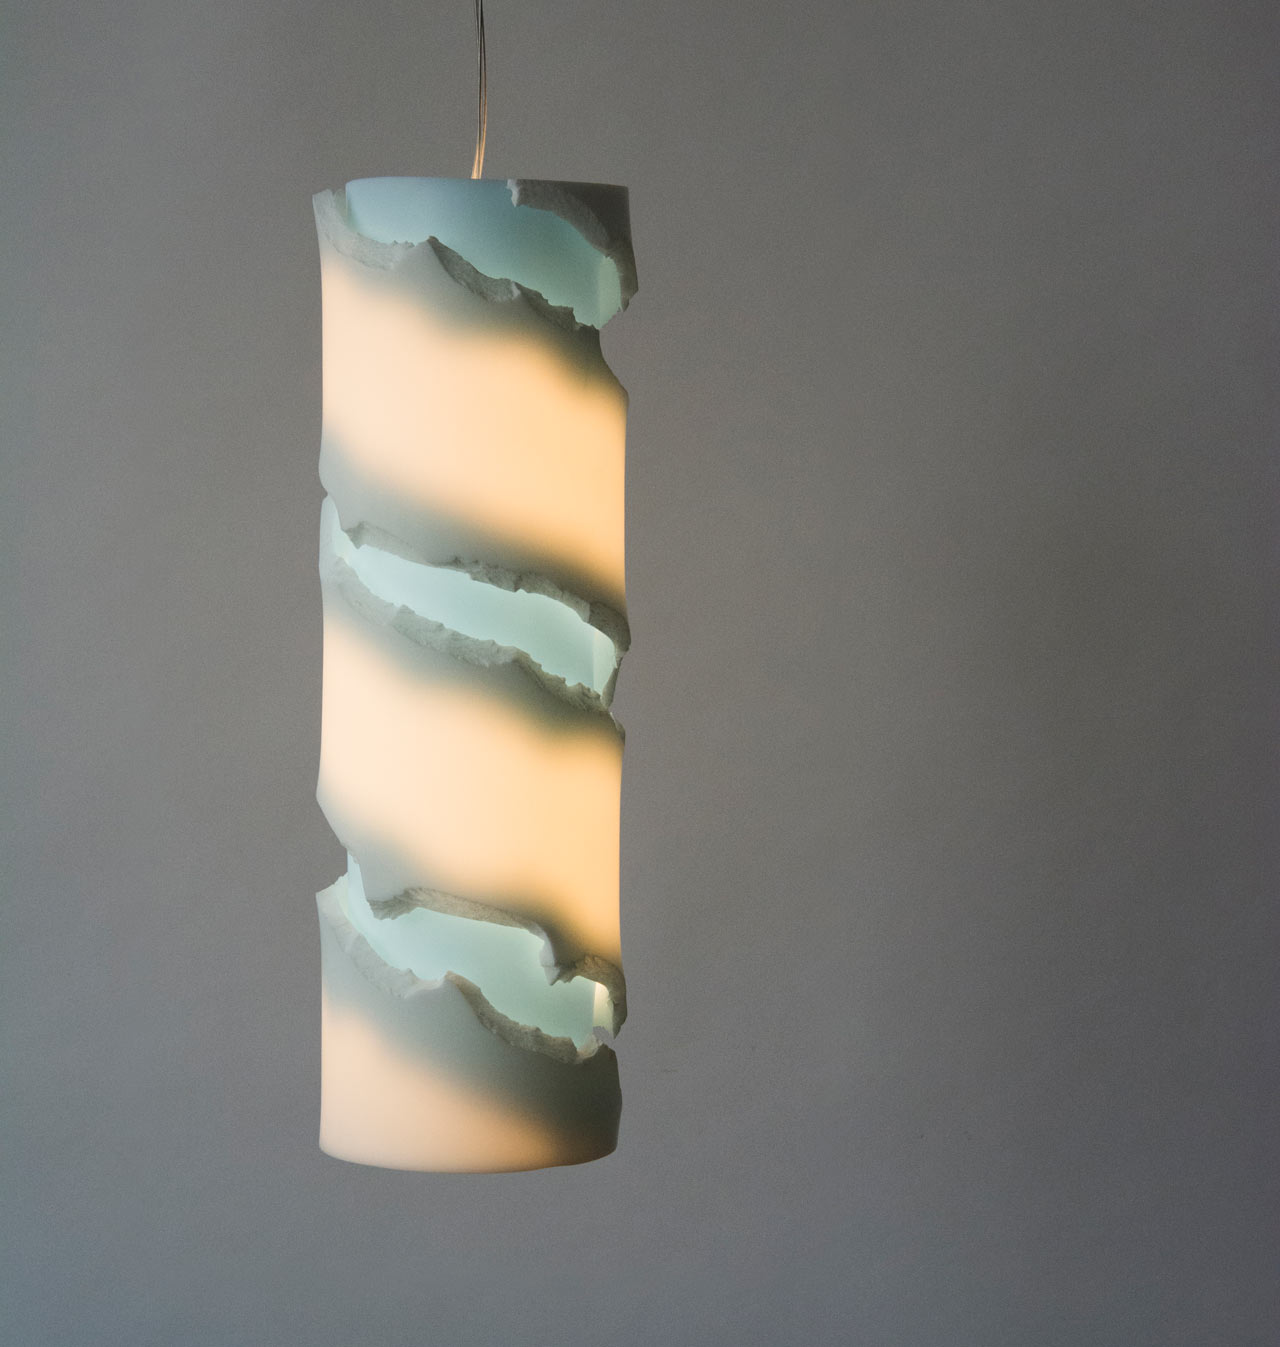 Studio Floris Wubben Creates the Crystal Twist Lighting Collection Out of Acrylic Stone